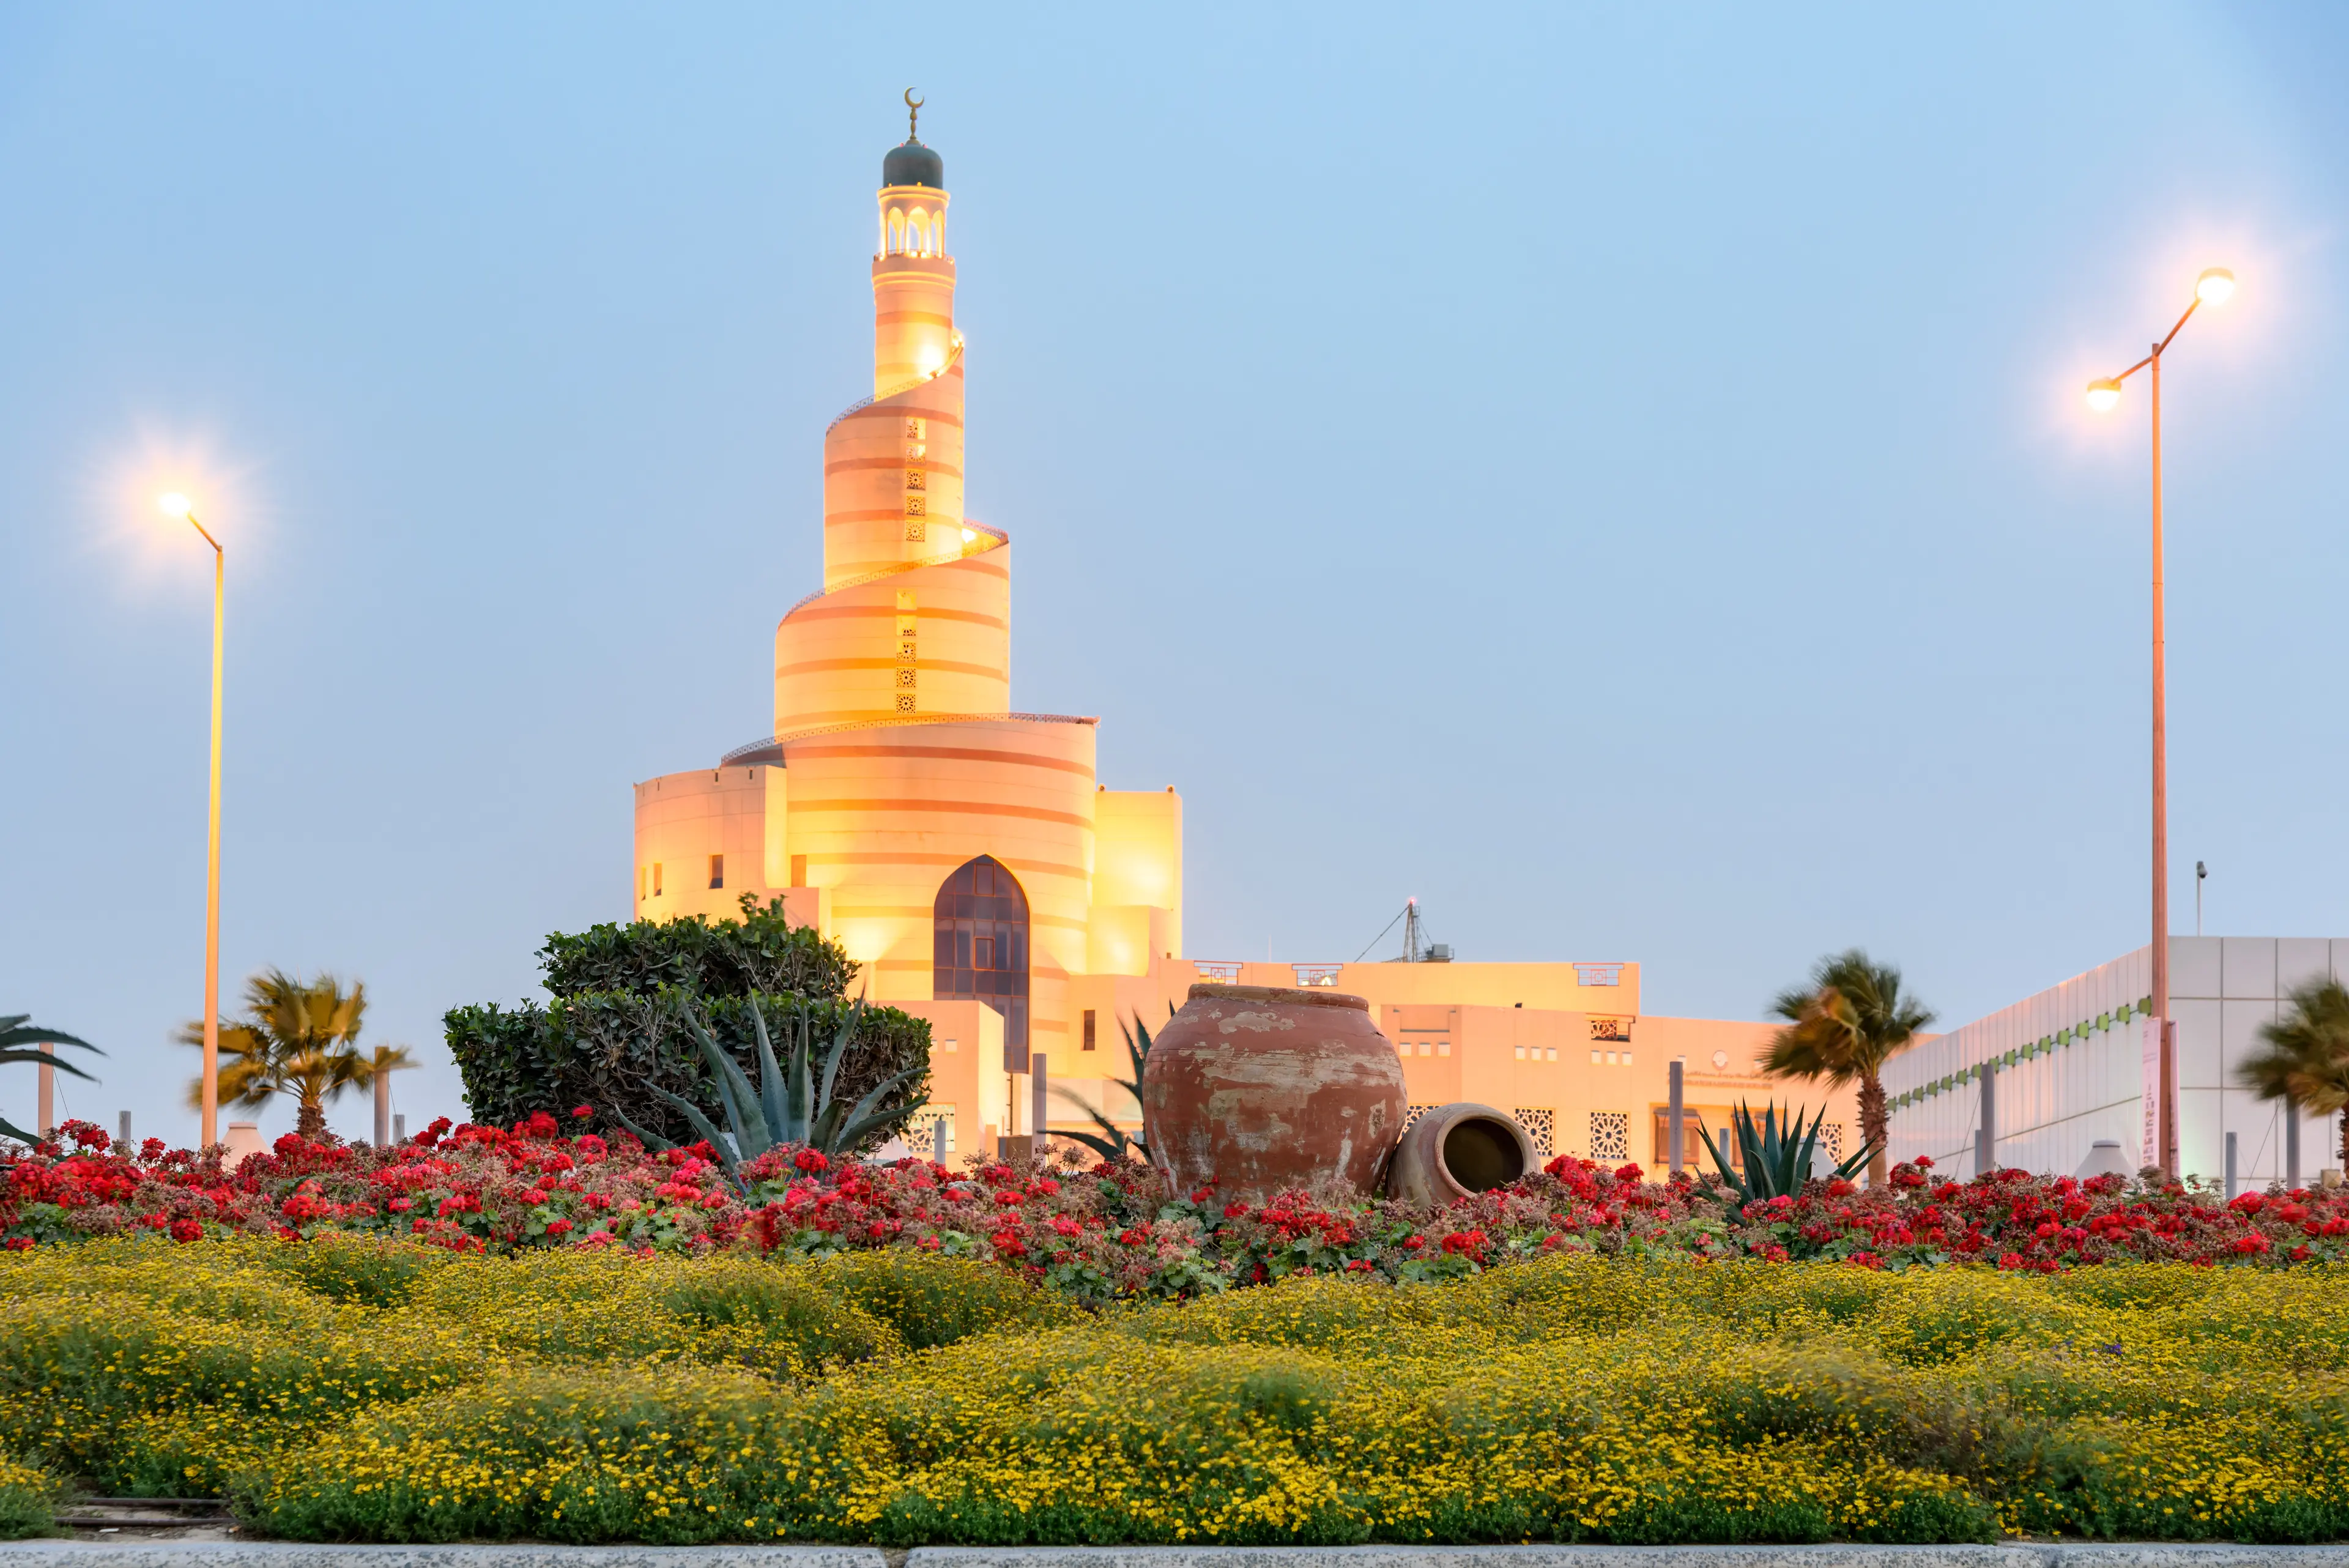 3-Day Solo Shopping and Sightseeing Adventure in Doha, Qatar